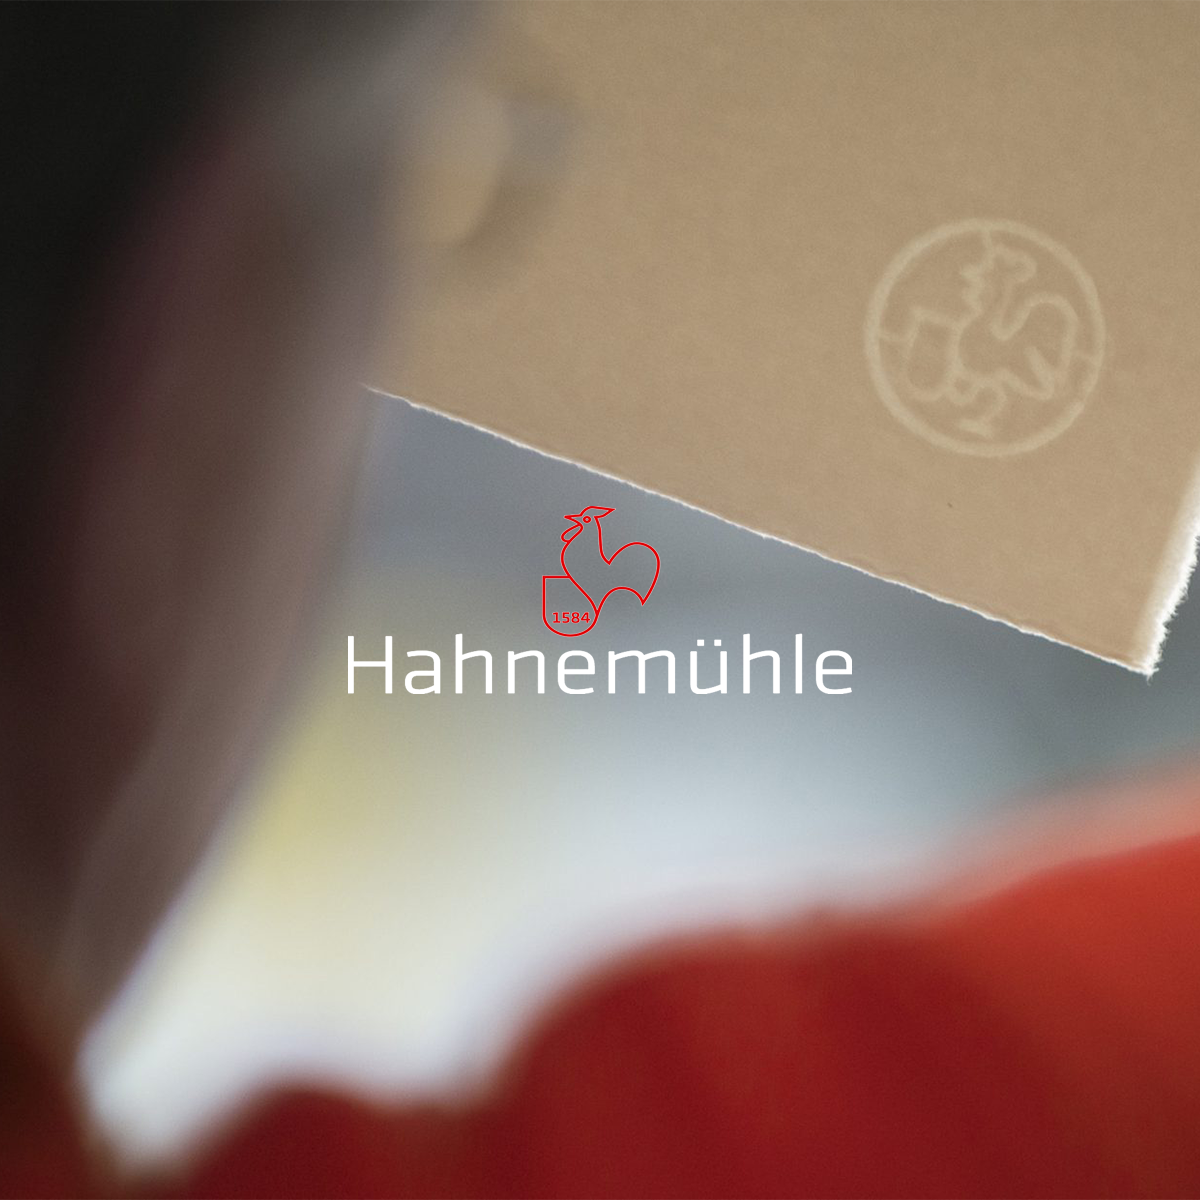 Hahnemuhle Fine Art Papers -  Melbourne Etching Supplies - Fine Art, Printmaking, Paper, Painting & Drawing materials online